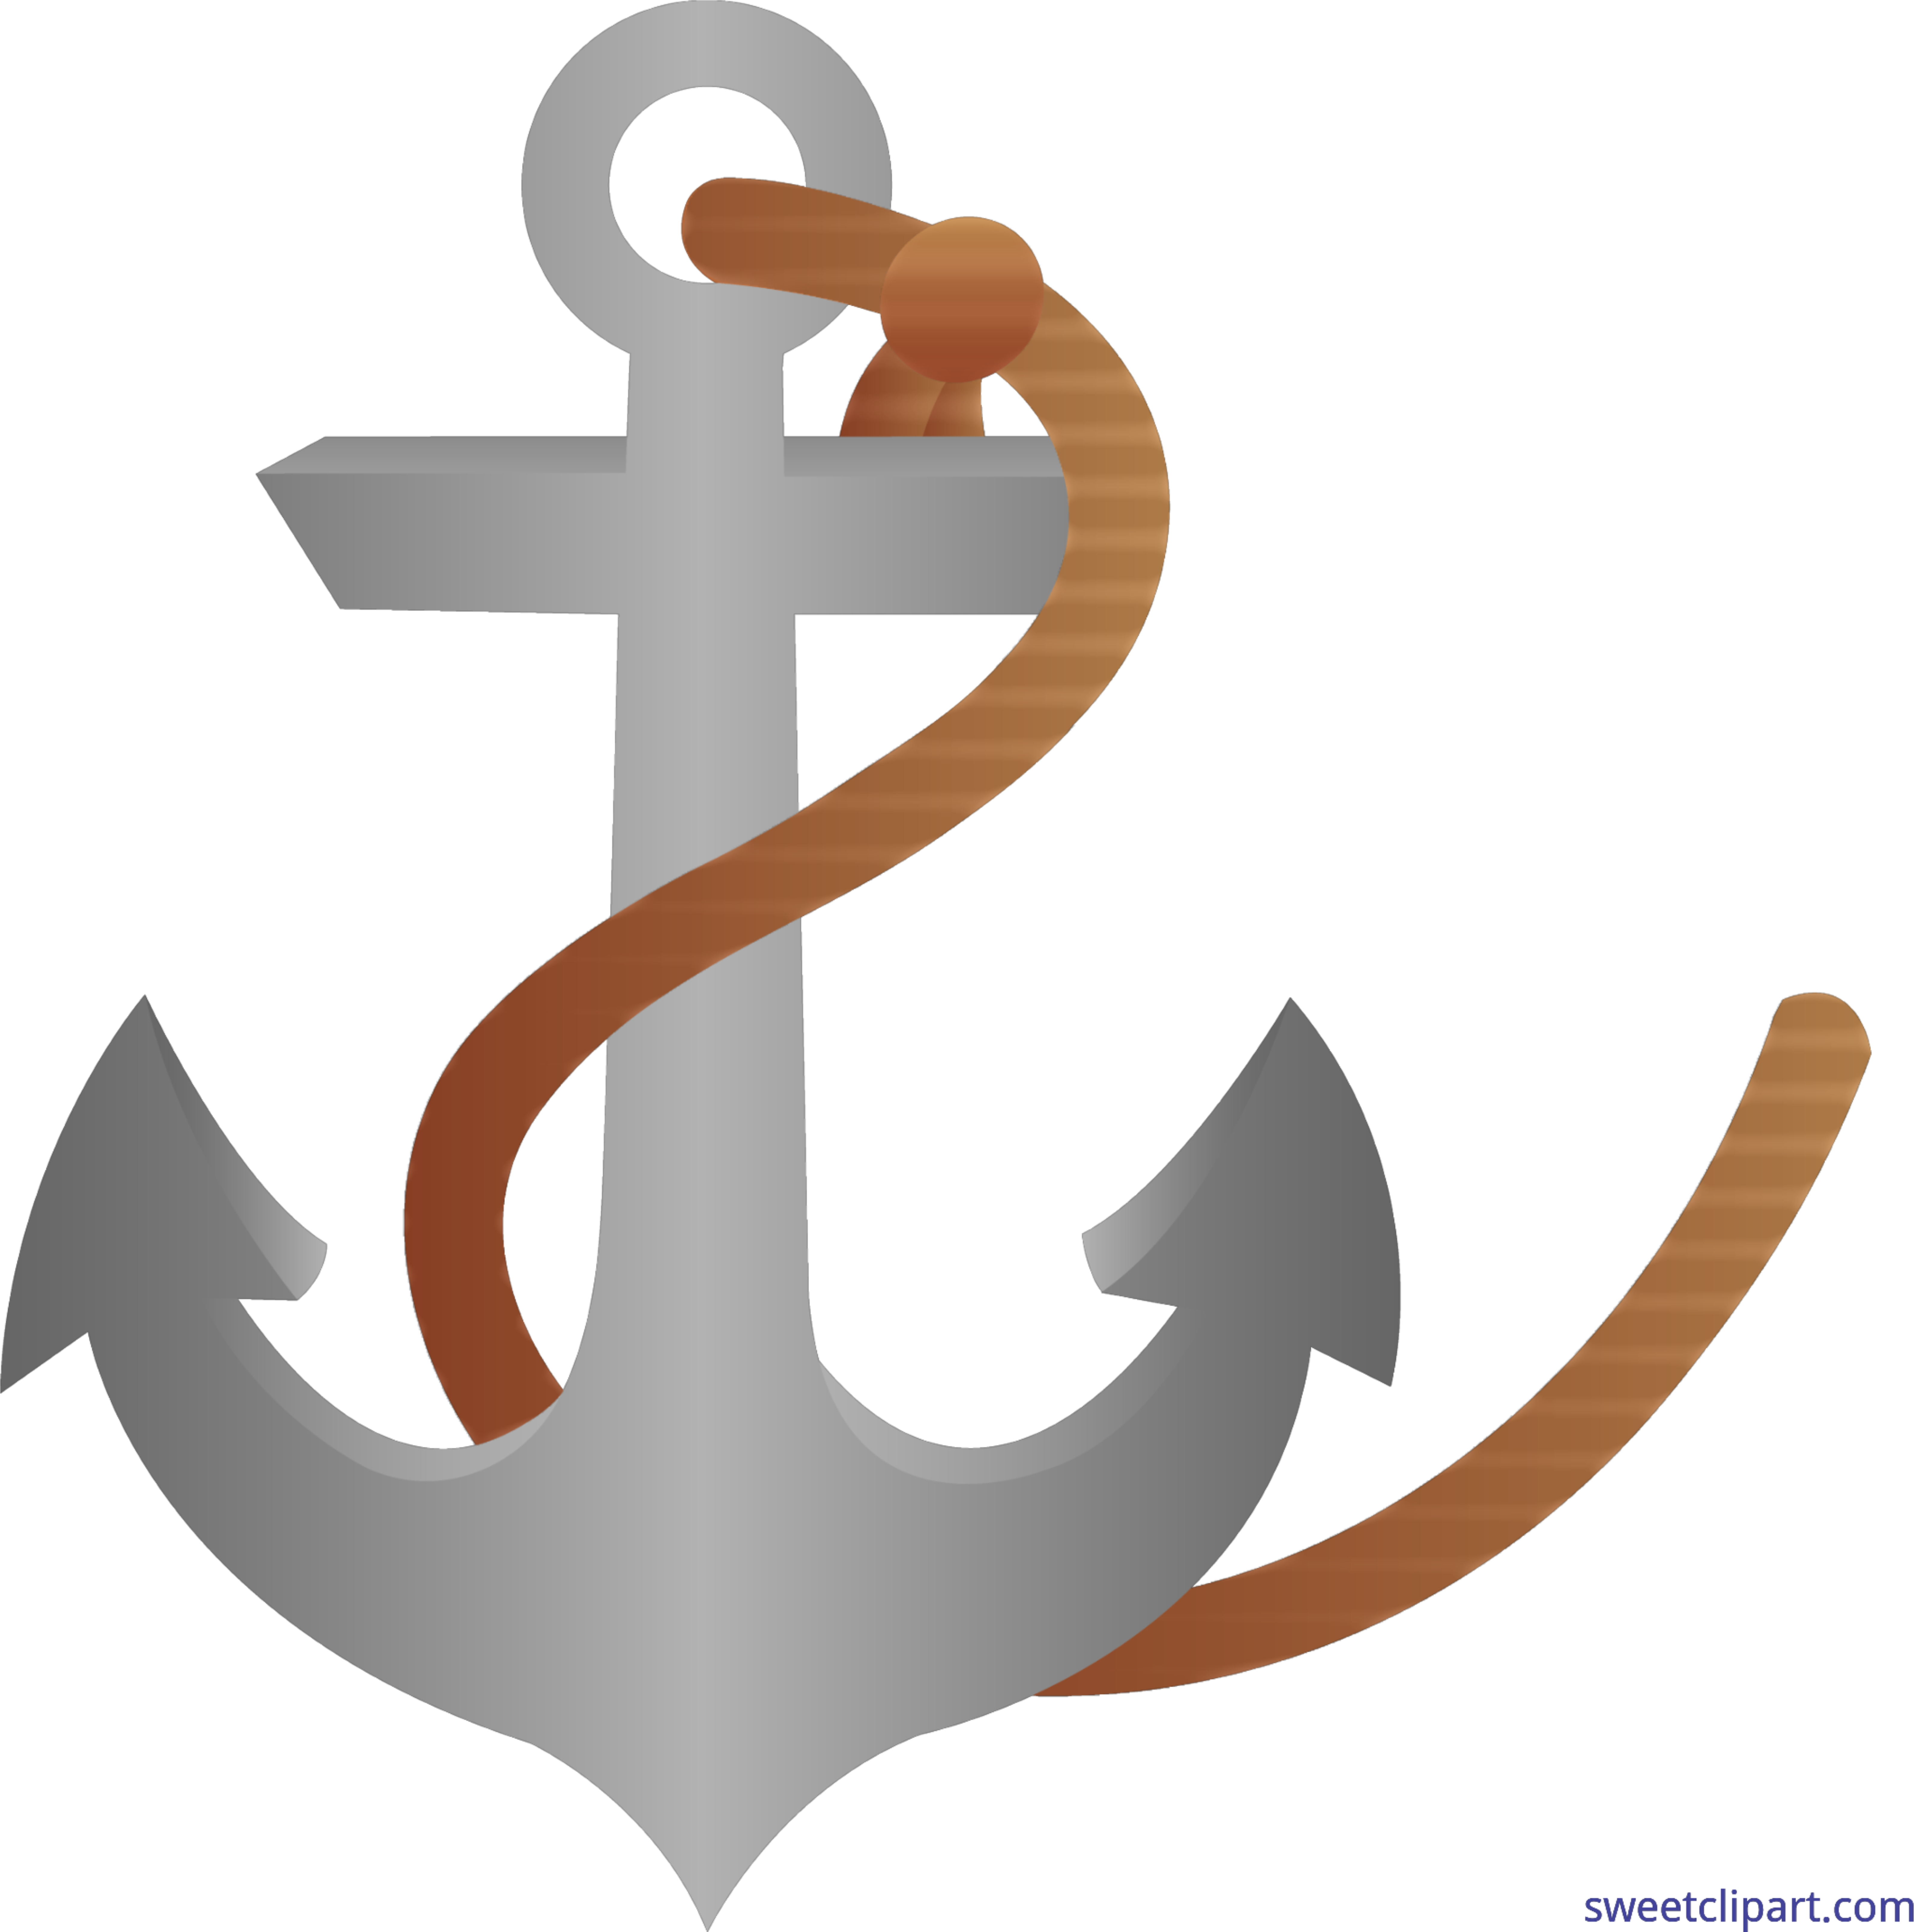 Download PNG image - Anchor PNG Isolated Transparent Image 